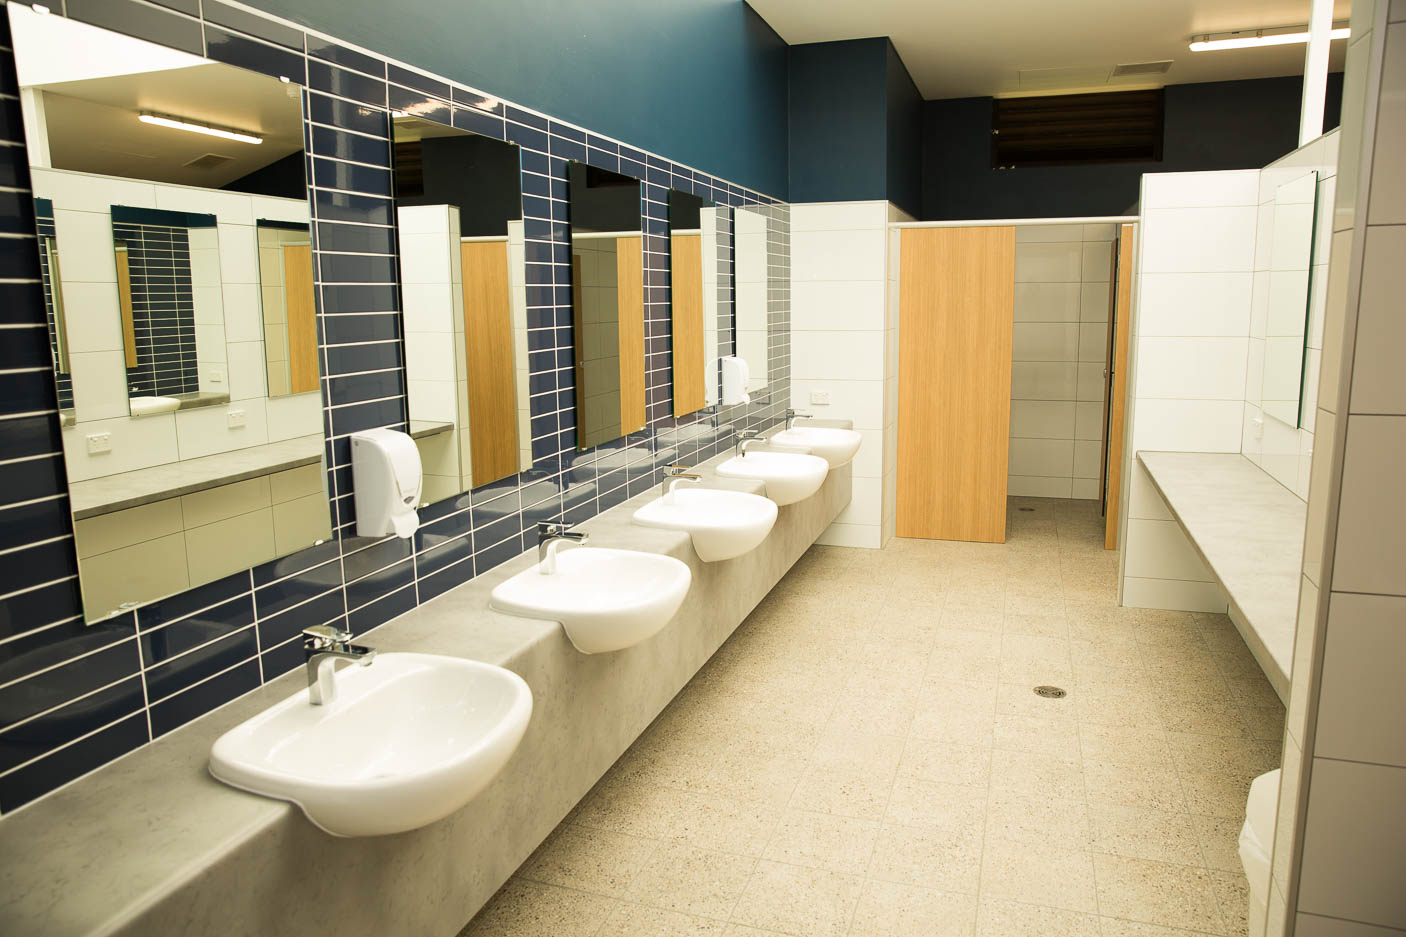 An interior view of the bathroom at the Spinnaker precinct